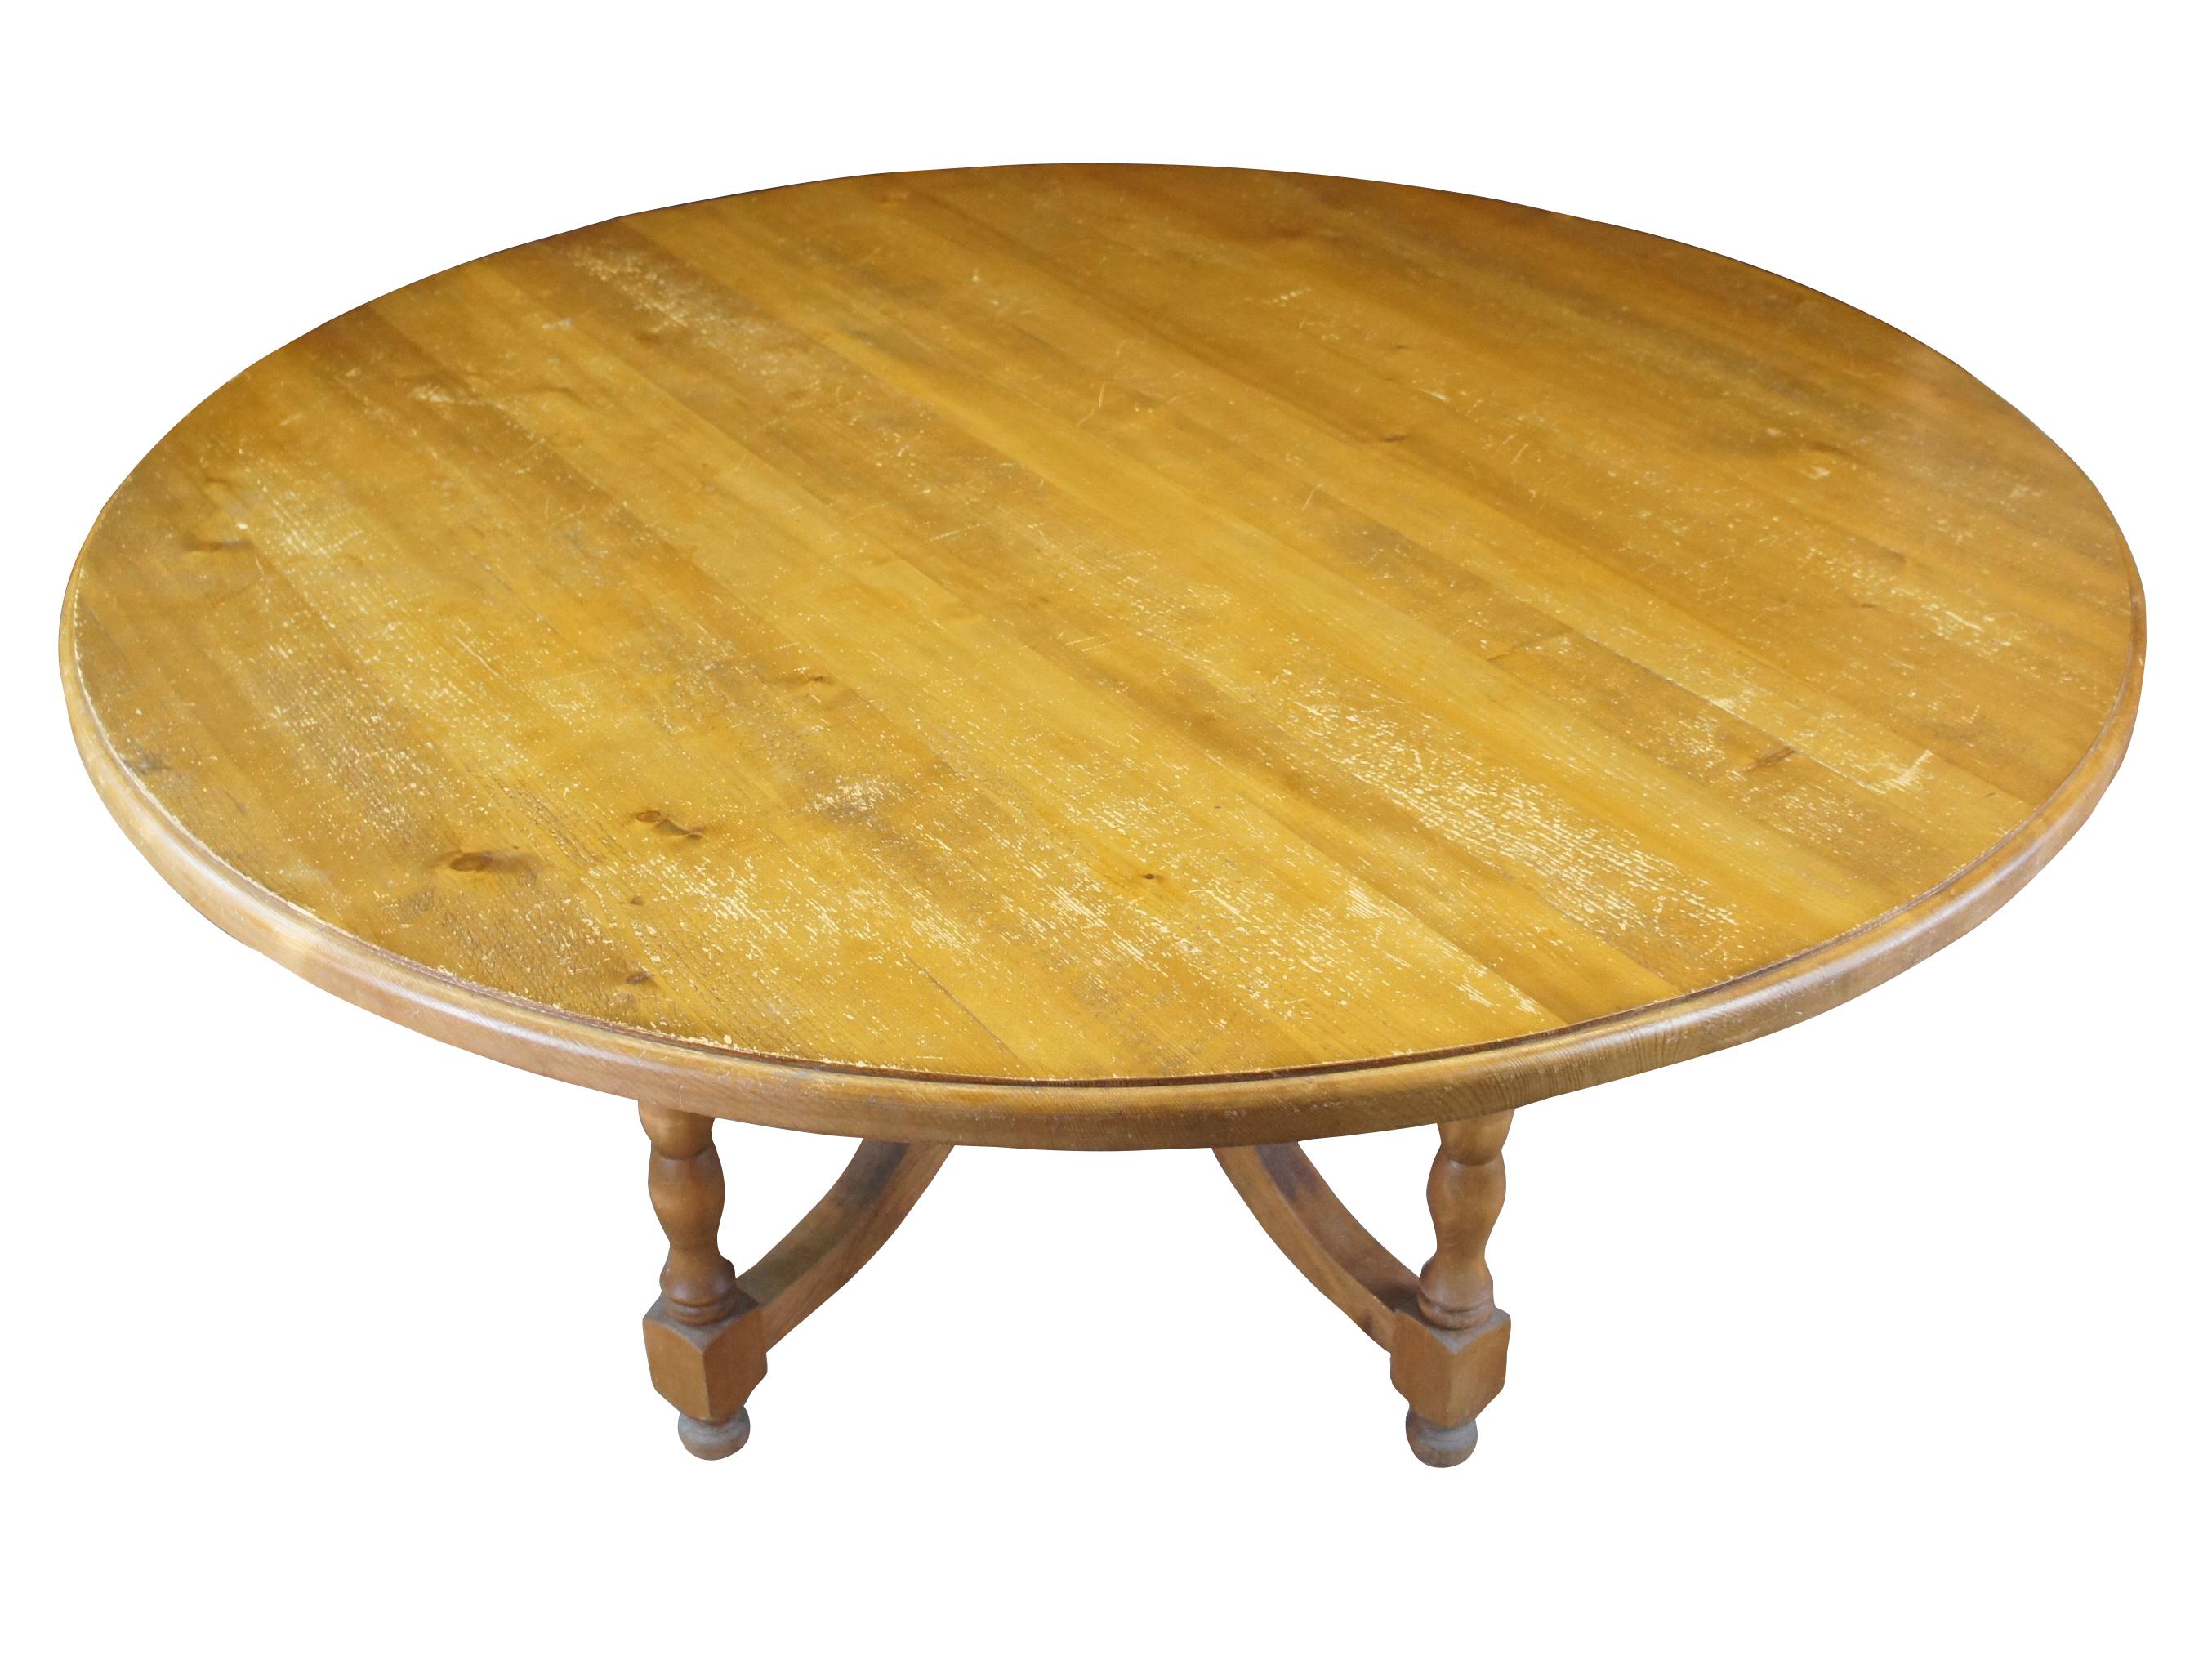 A large impressive European dining, breakfast or center table. Made from distressed pine in the Czech Republic, circa 1980s. Features a large round top over a five leg baluster turned base with bun feet. Each leg is connected to the robust center